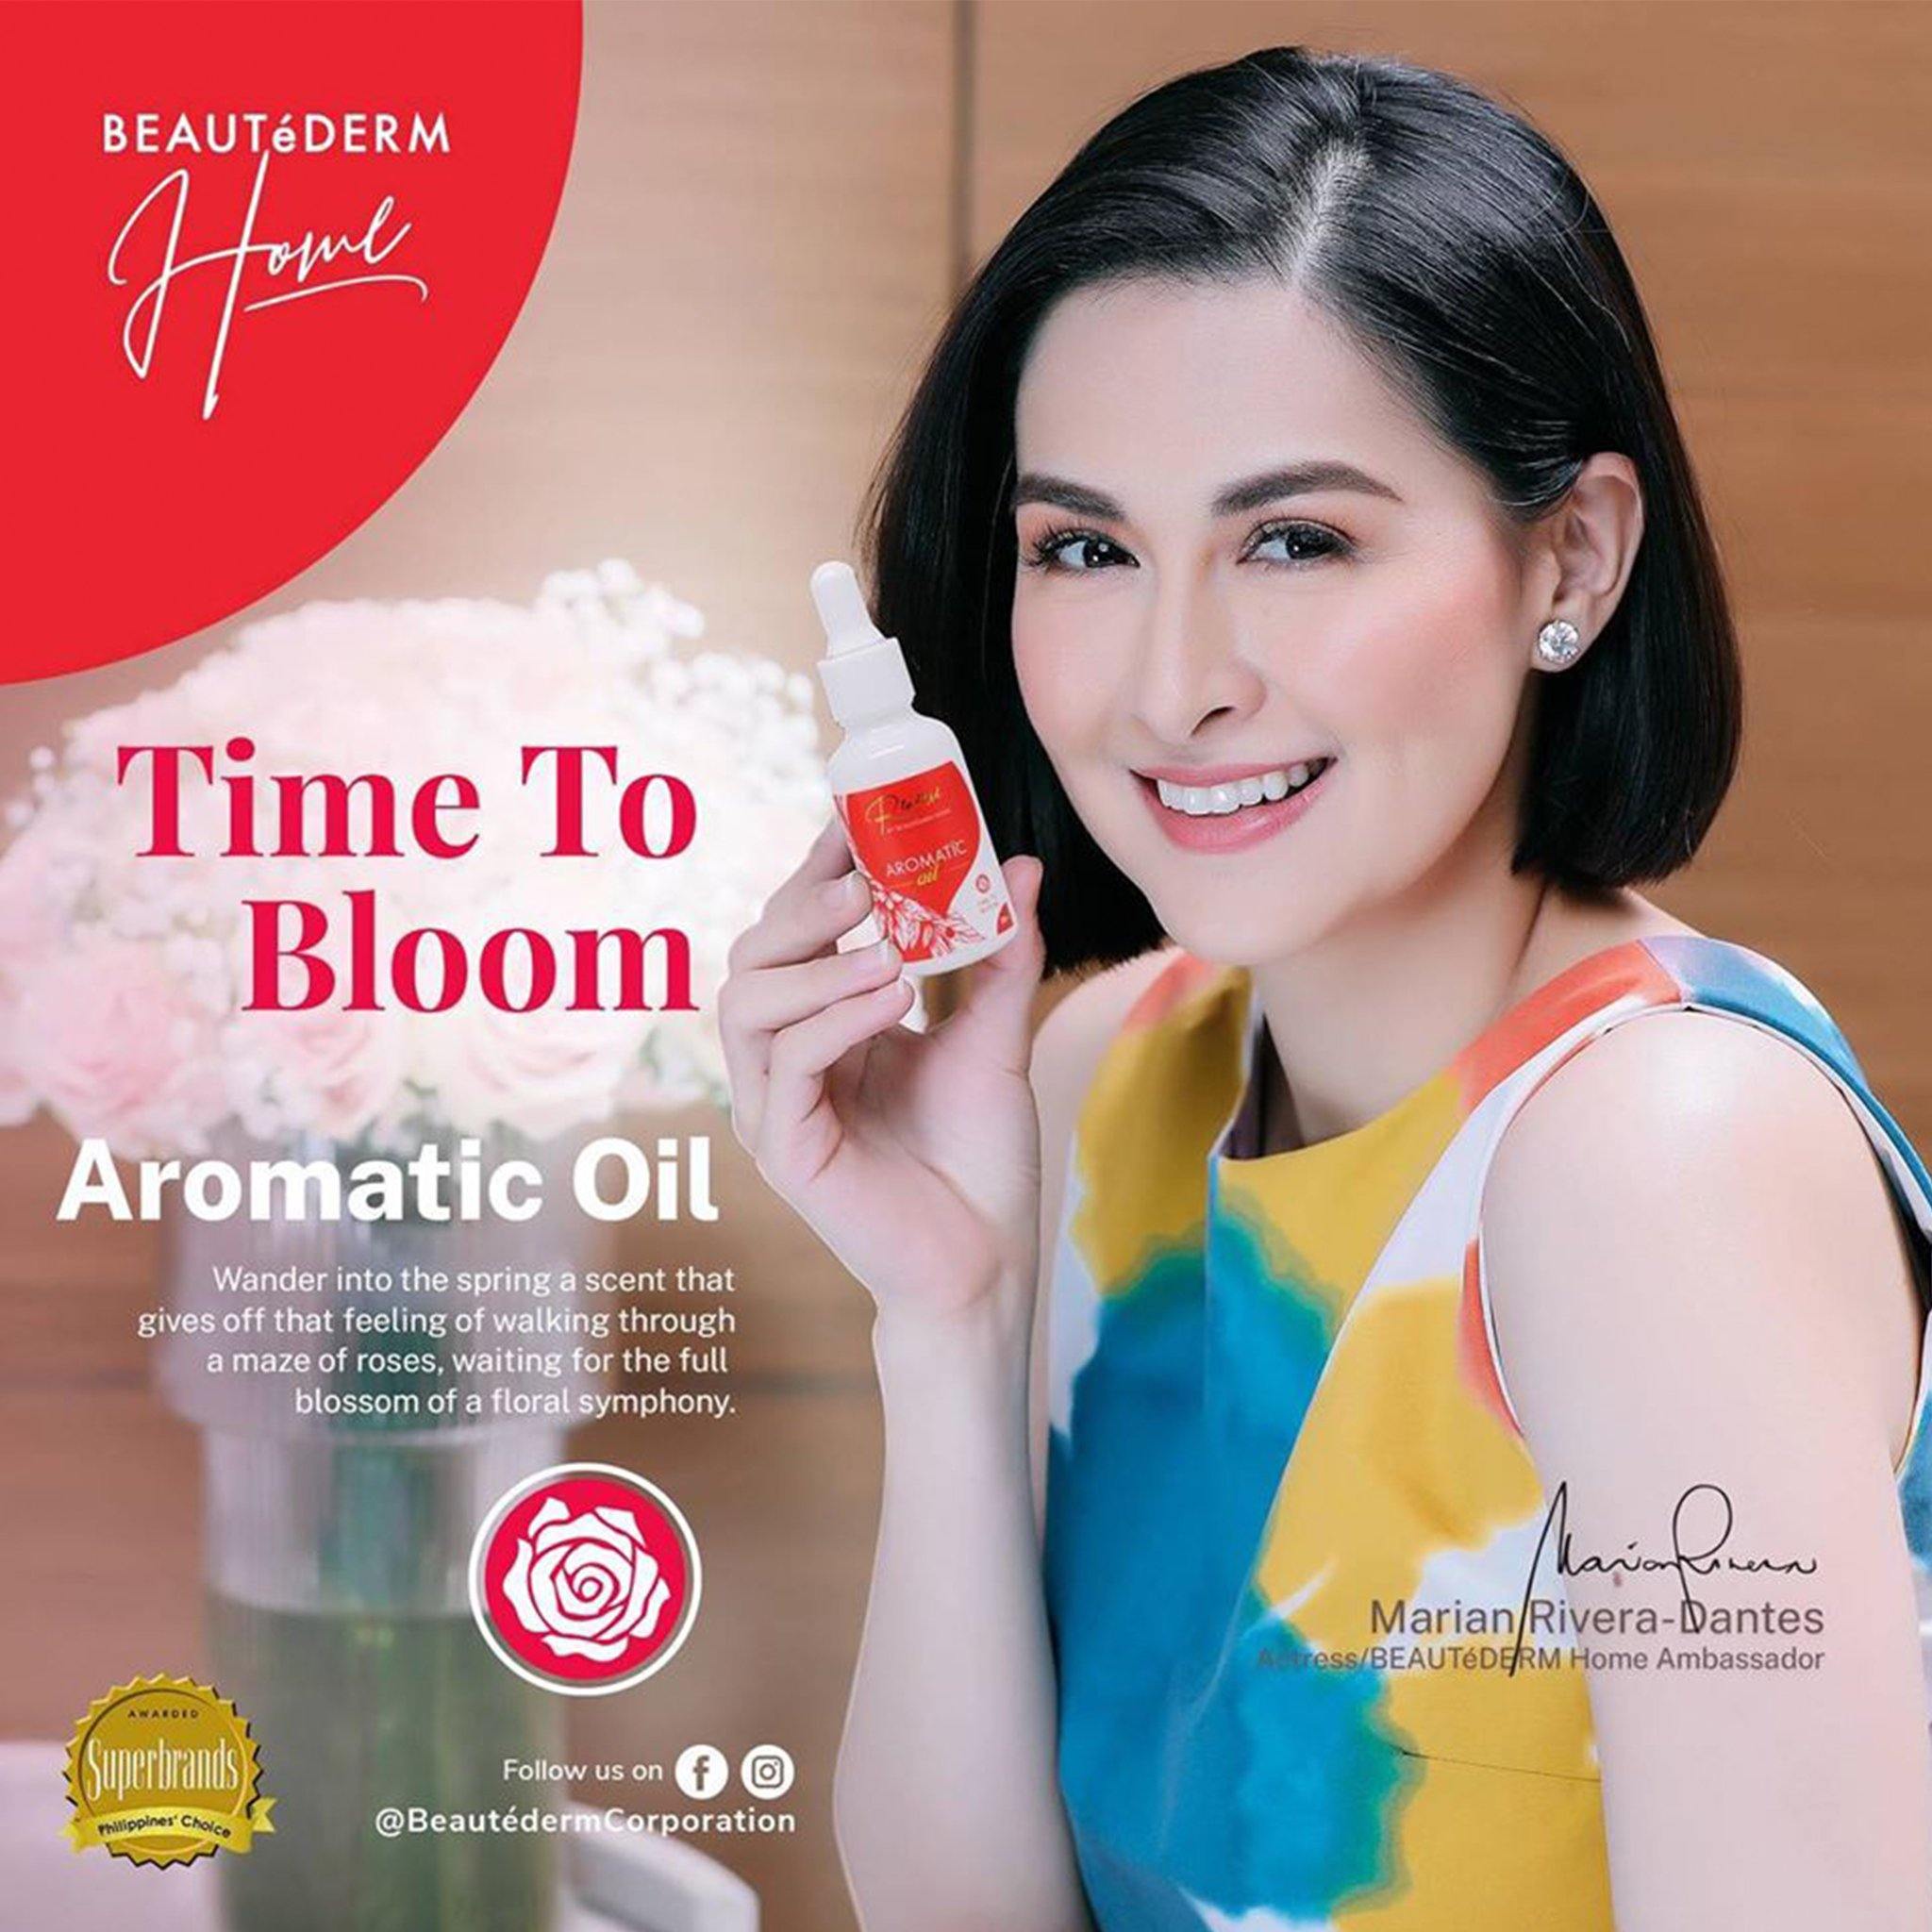 Aromatic Oil, Time To Bloom (Fresh Rose Scent), 30ml, Reverie by Beautederm Home, with Marian Rivera-Dantes (Beautederm Home Ambassador)